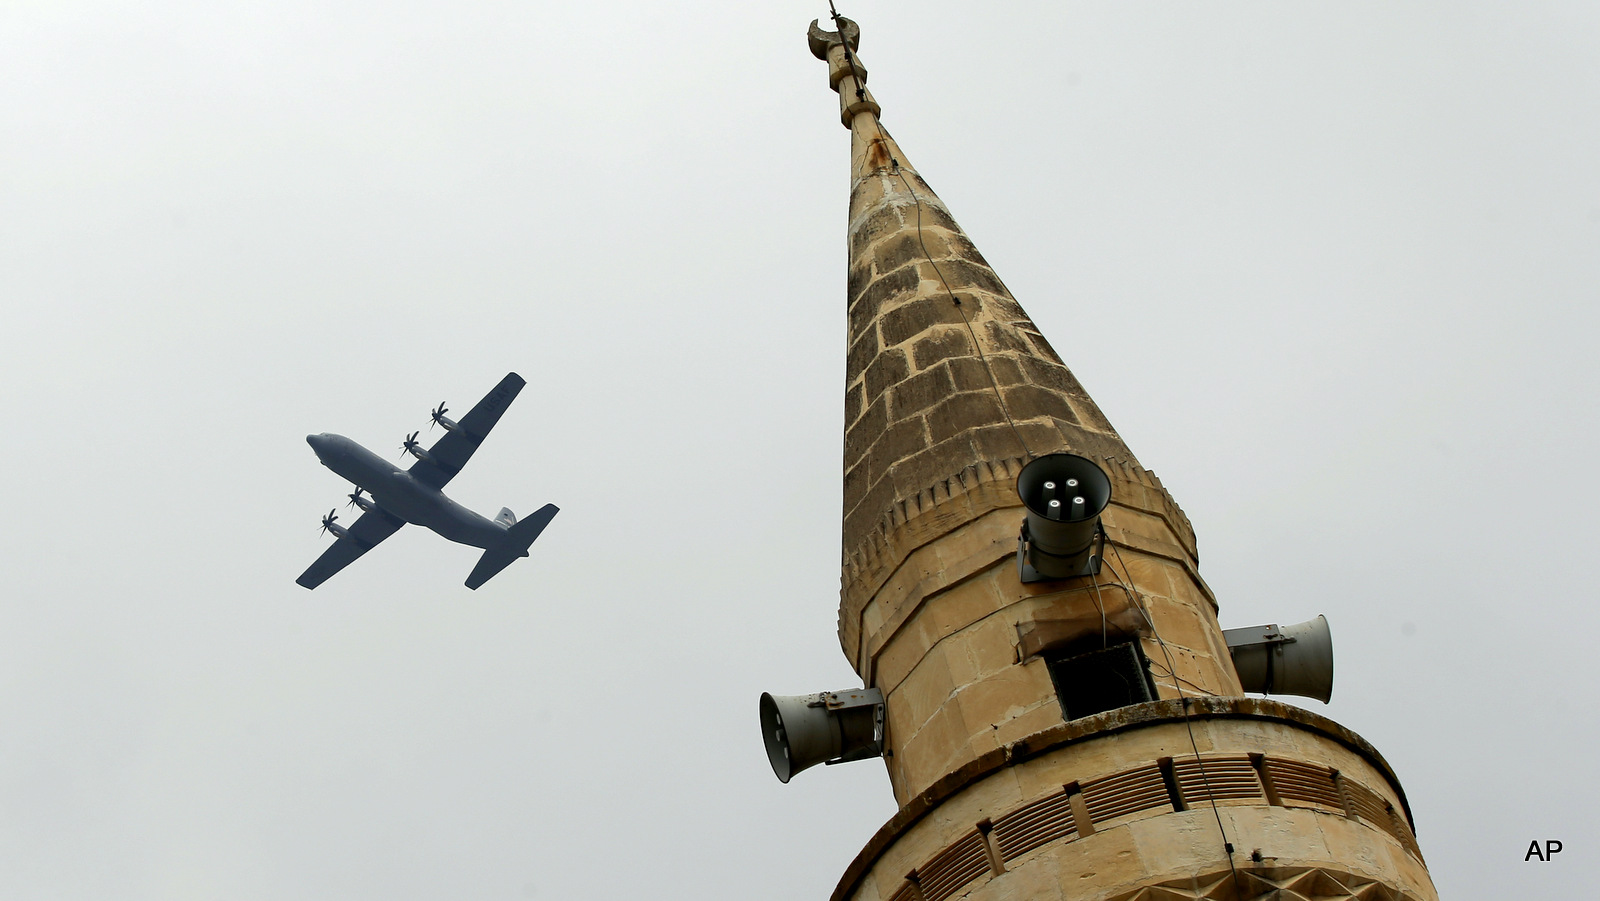 With a mosque's minaret in the foreground, a United States Air Force cargo plane takes off from the Incirlik Air Base, in the outskirts of the city of Adana, southern Turkey, Thursday, July 30, 2015. Turkish Foreign Ministry spokesman Tanju Bilgic said Wednesday, that an agreement allowing the U.S.-led coalition against the IS to launch airstrikes from Incirlik and other Turkish bases has been approved by Cabinet. (AP Photo/Emrah Gurel)